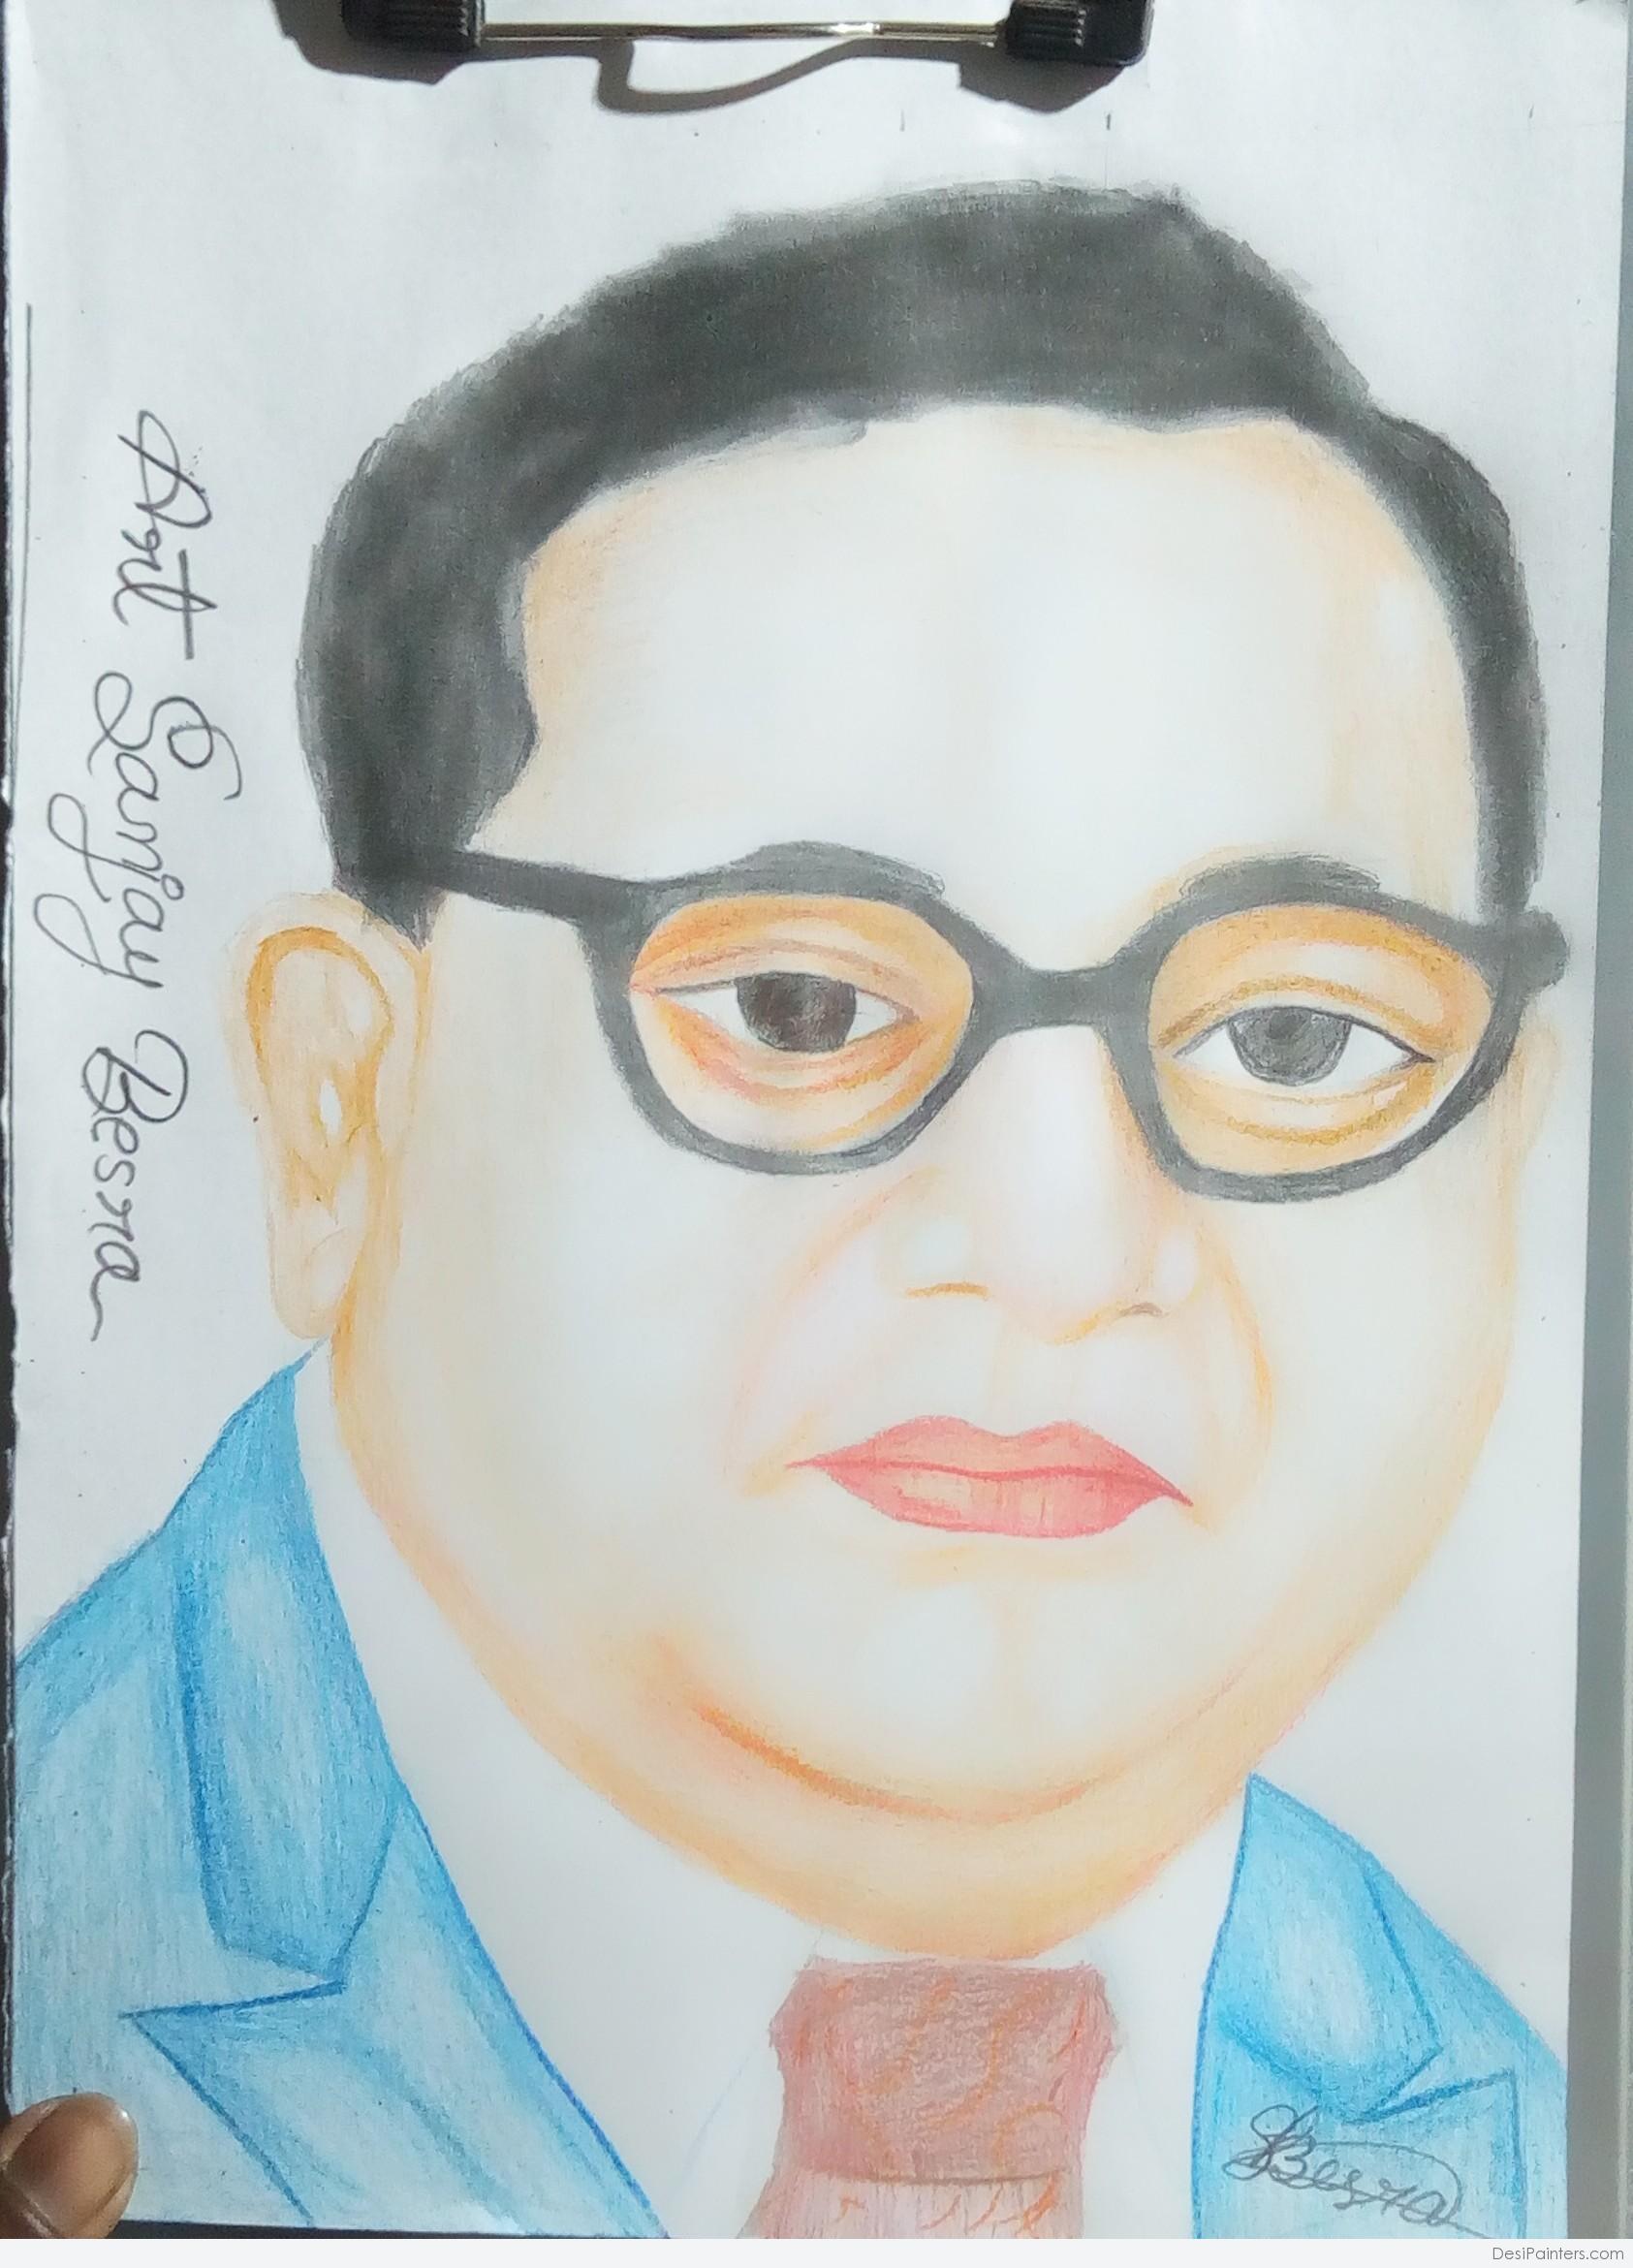 Ambedkar Jayanti 2020 Quotes, Images, and Messages in English: Dr. Bhim Rao  Ambedkar's birth anniversary will be celebrated on Tuesday 14 April